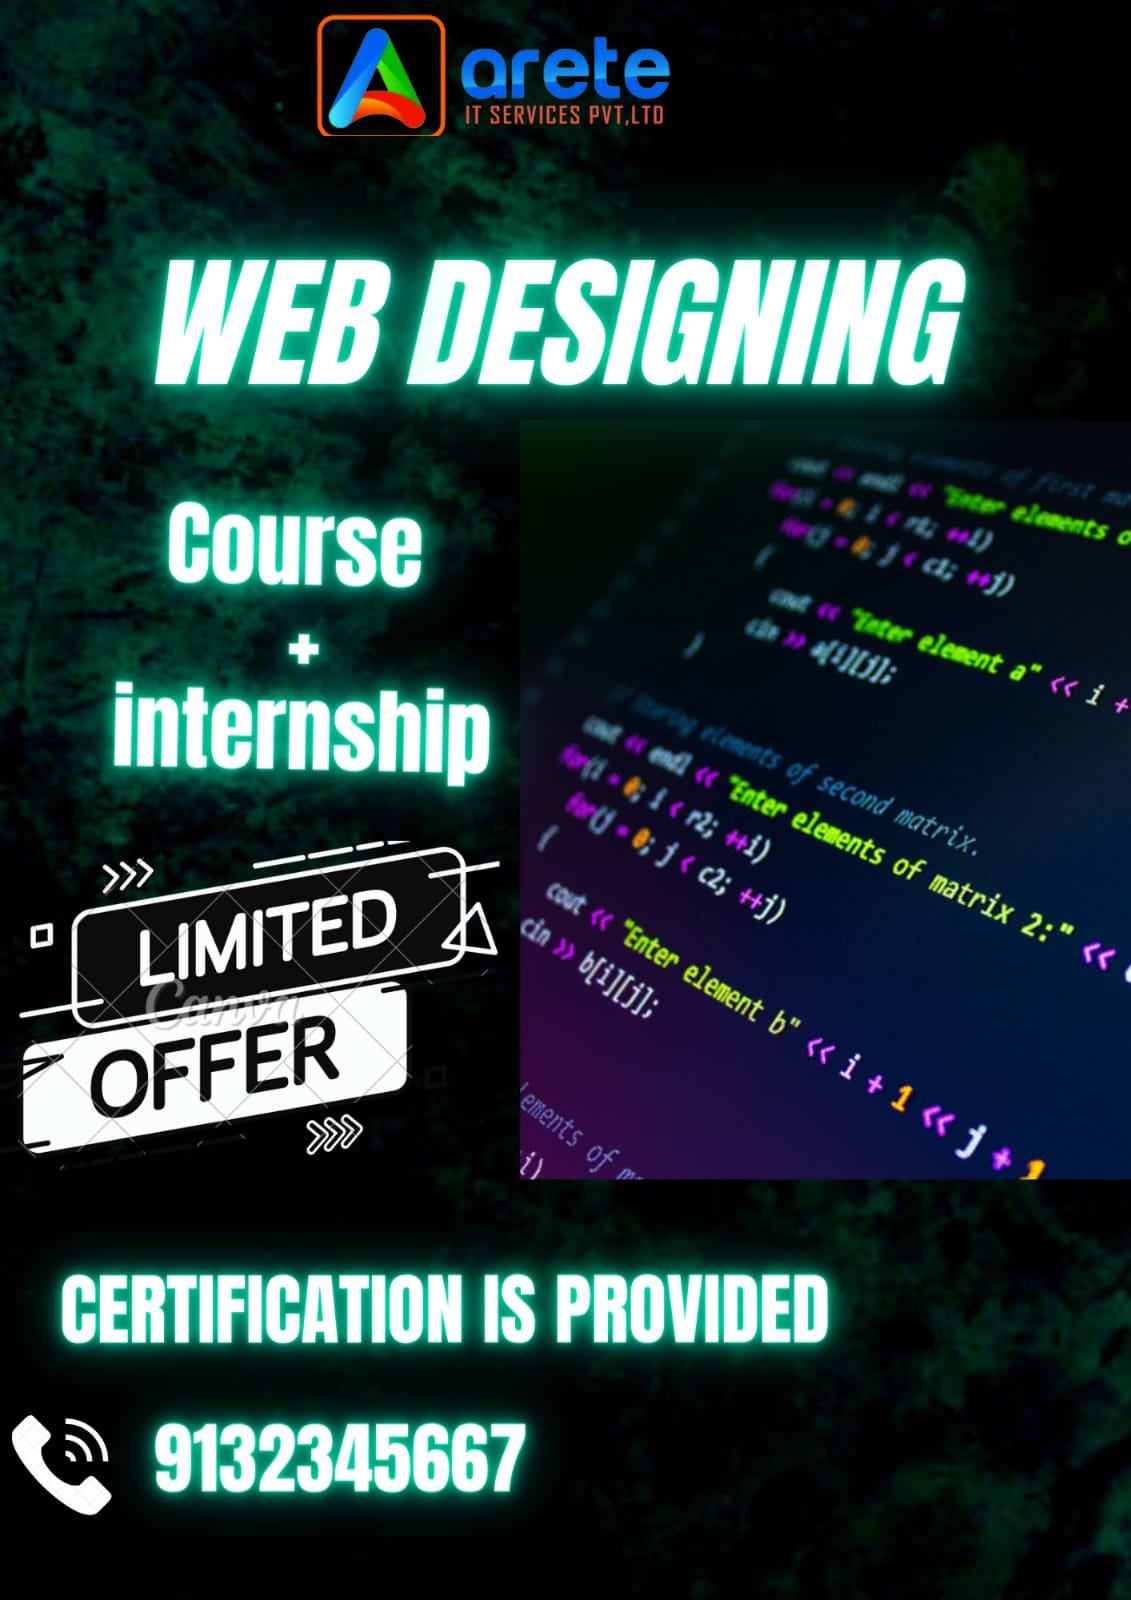 Best web designing course with certification.